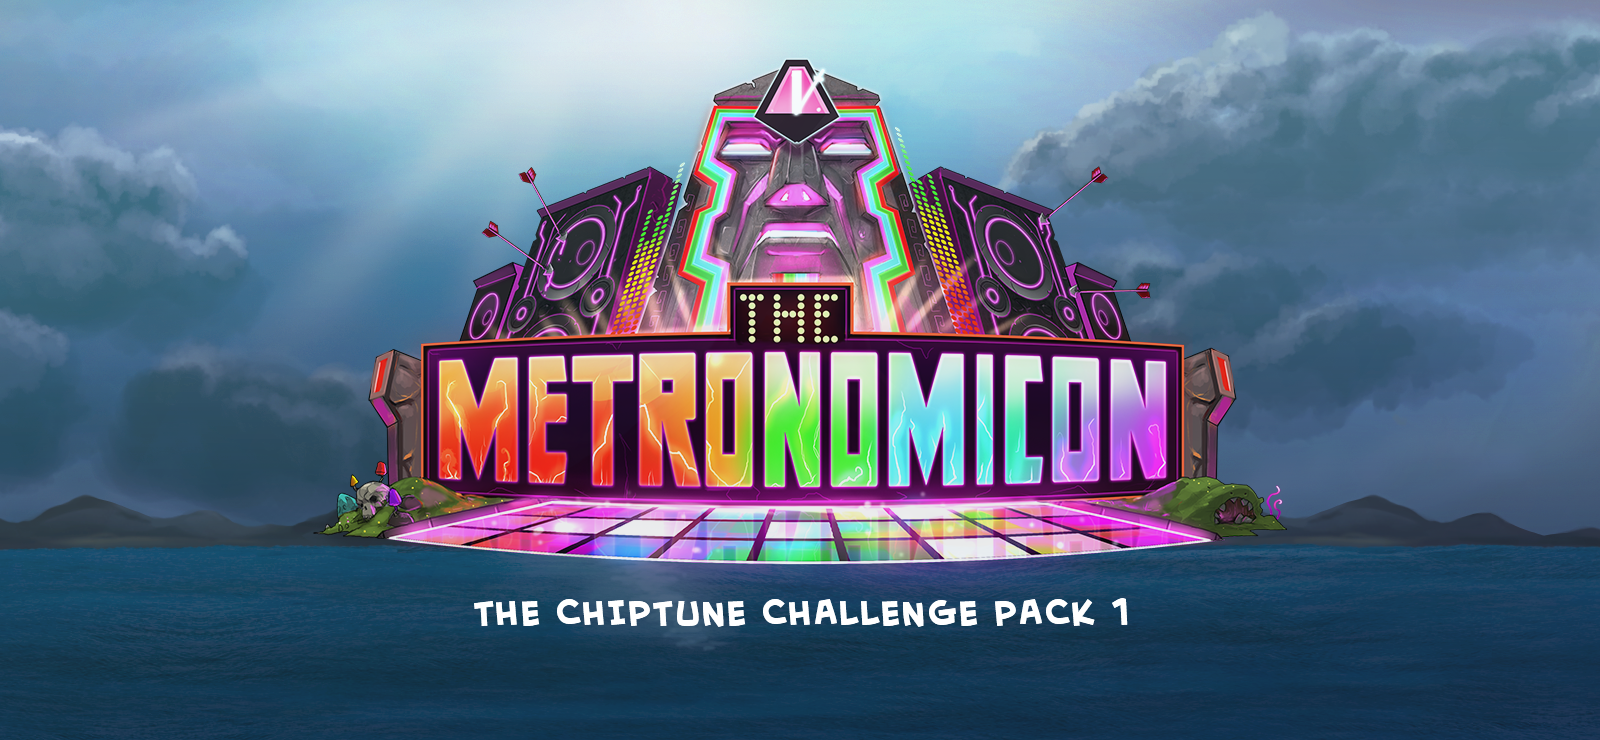 The Metronomicon - Chiptune Pack 1